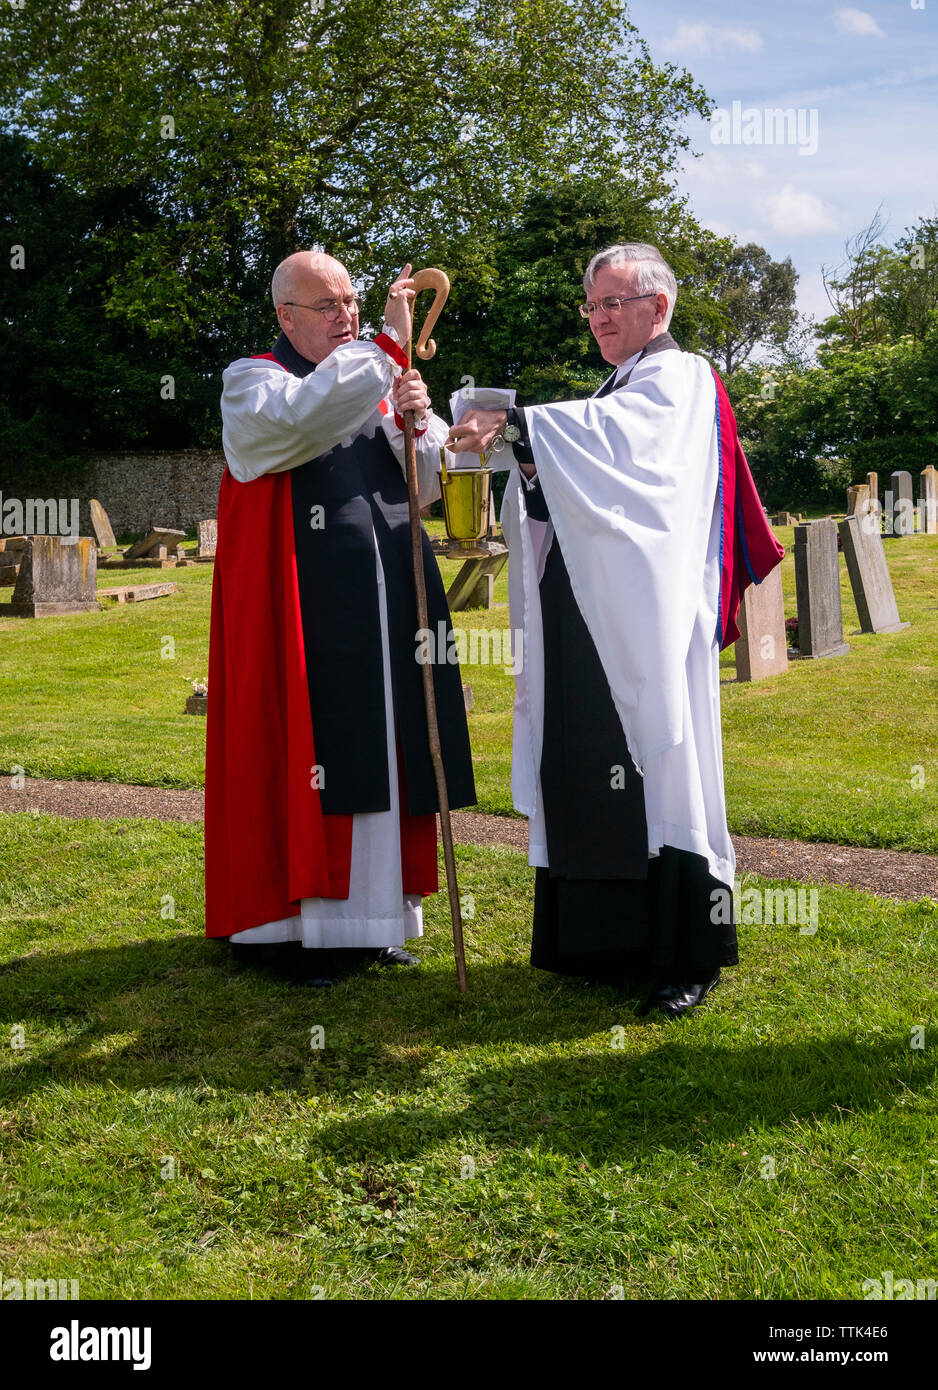 This service is very rarely performed as few churchyard extensions are being built.  The Bishop accompanied by the vicar the Reverend Doctor Robert Beaken and two church wardens walks around the plot making the sign of the cross with his staff and blessing the ground at each corner Stock Photo